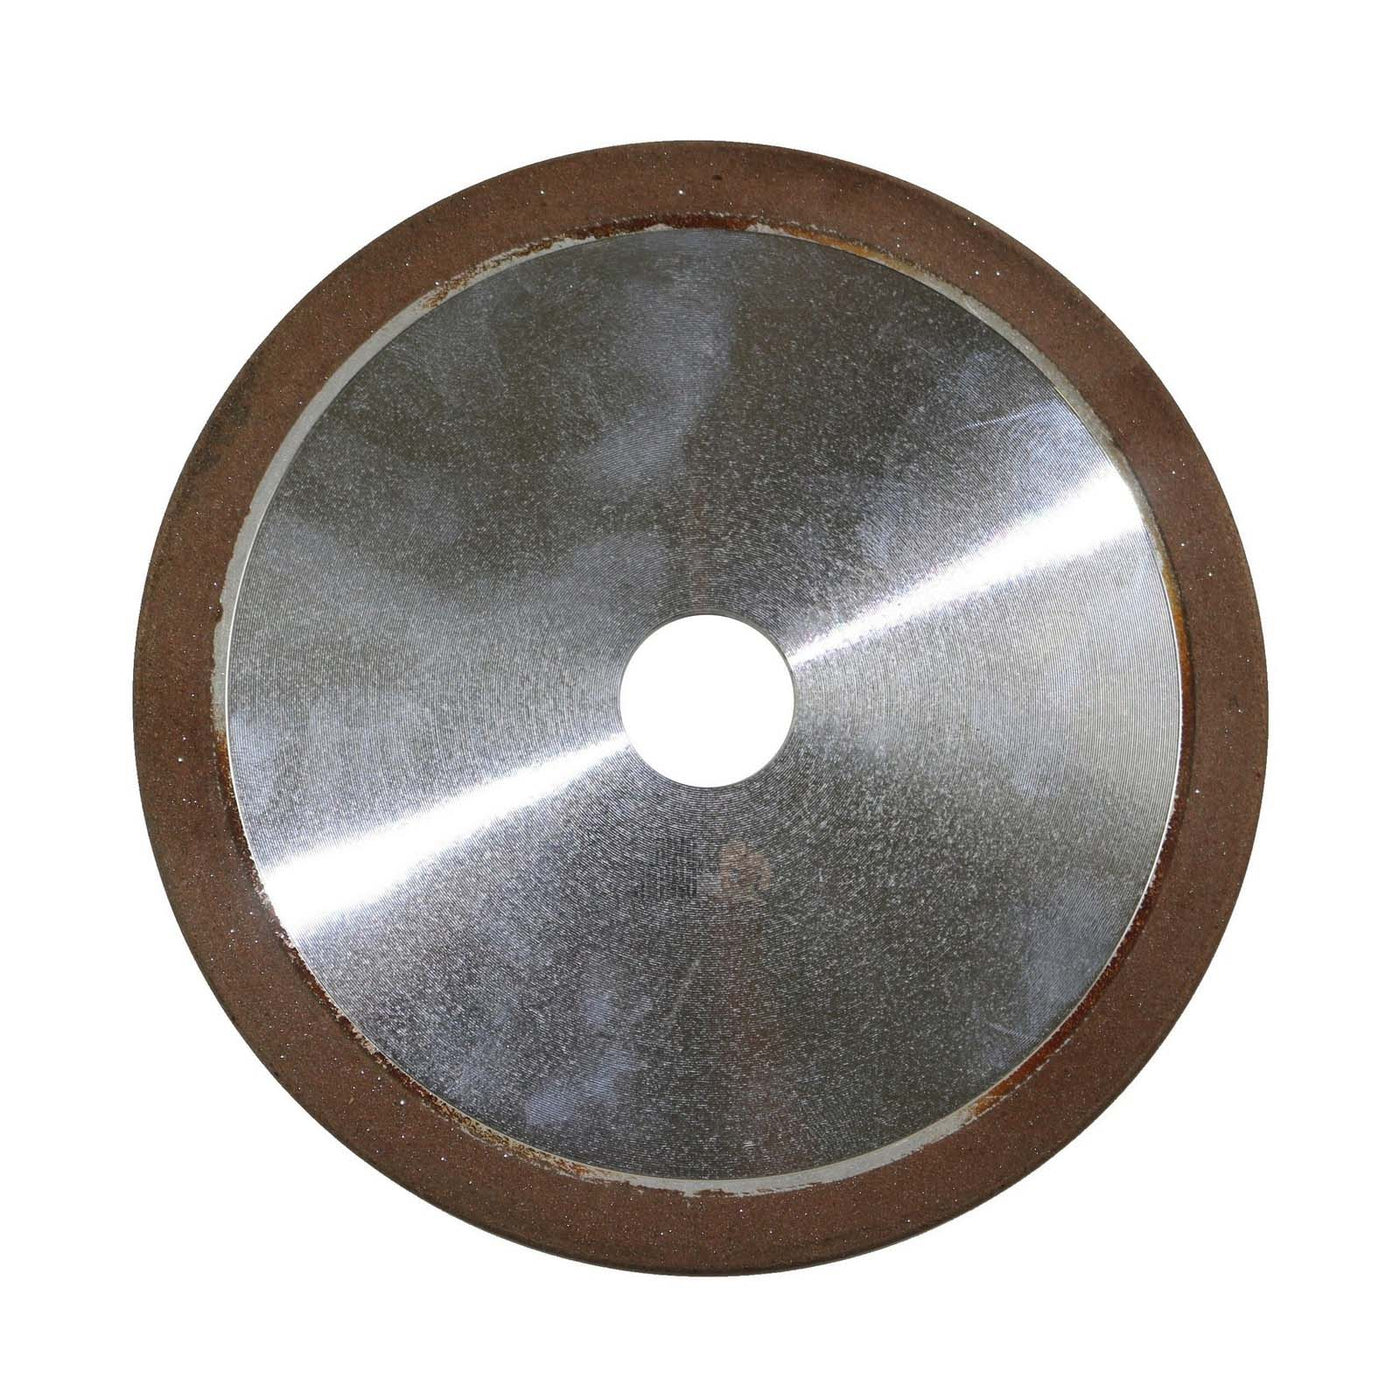 Diamond Sharpening Disc 145mm for 3/8 .325 3/8LP .404 Chainsaw Chain